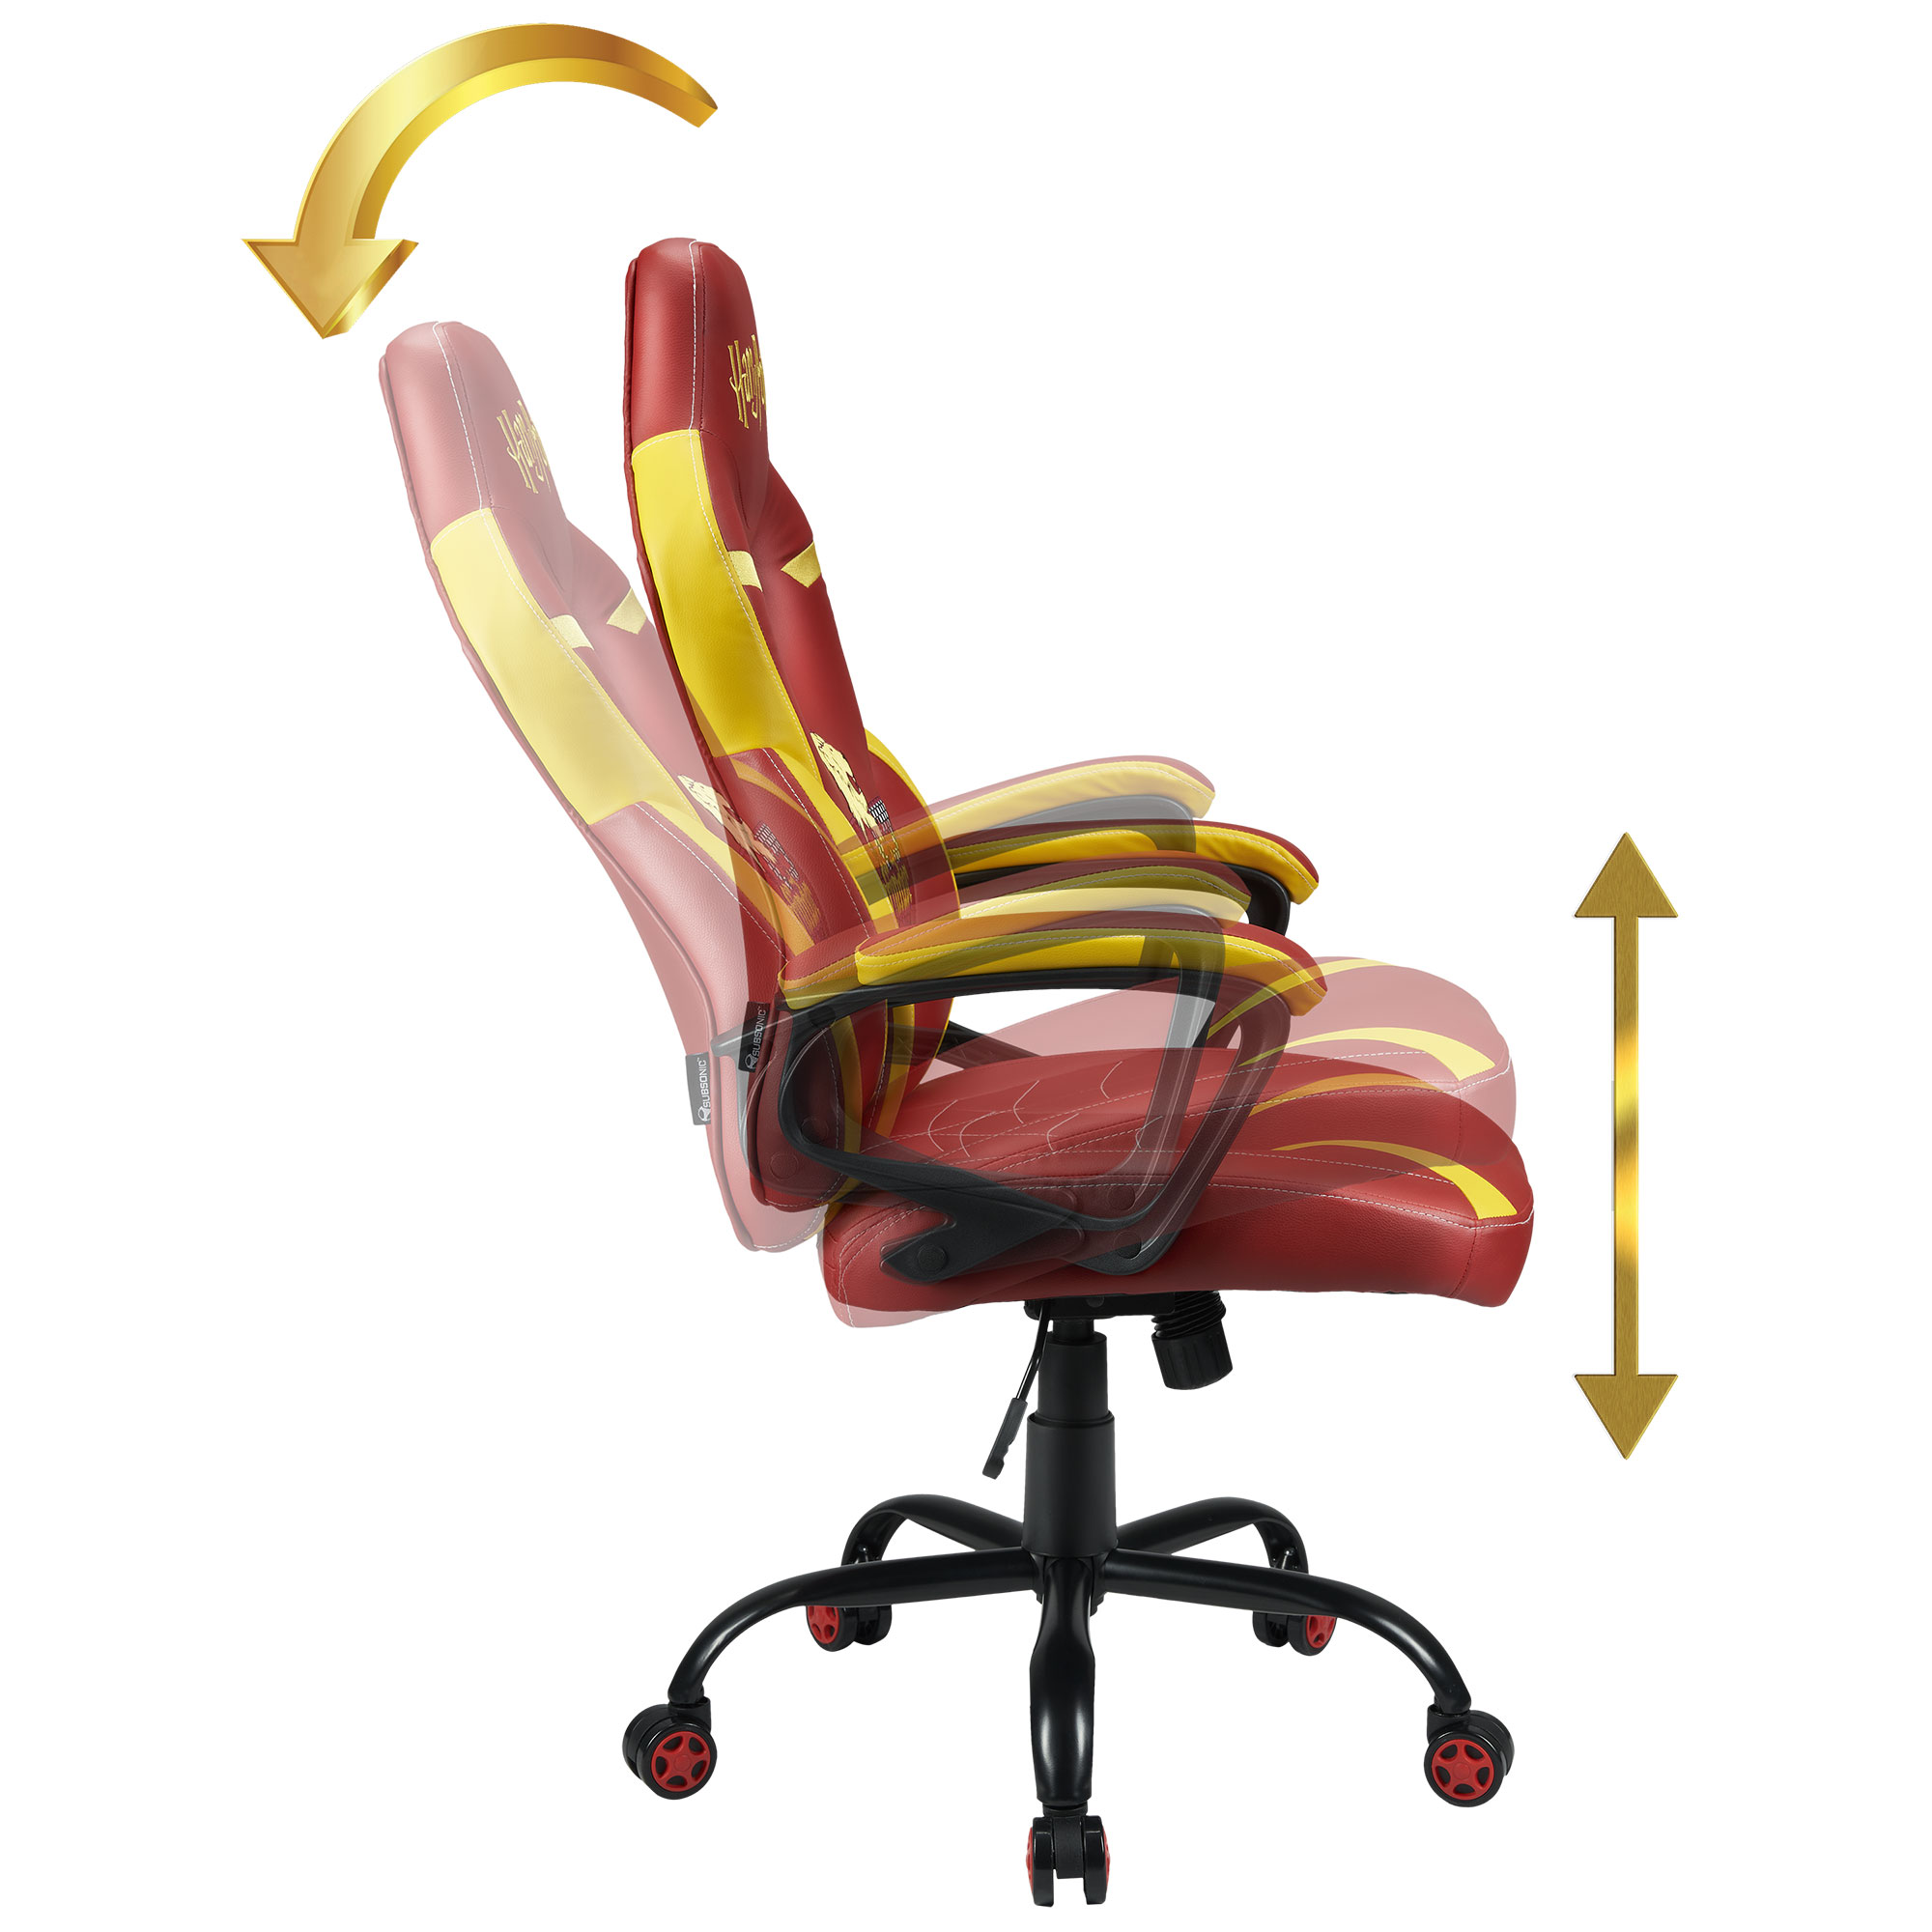 Gaming Chair Junior Griffindor | Subsonic